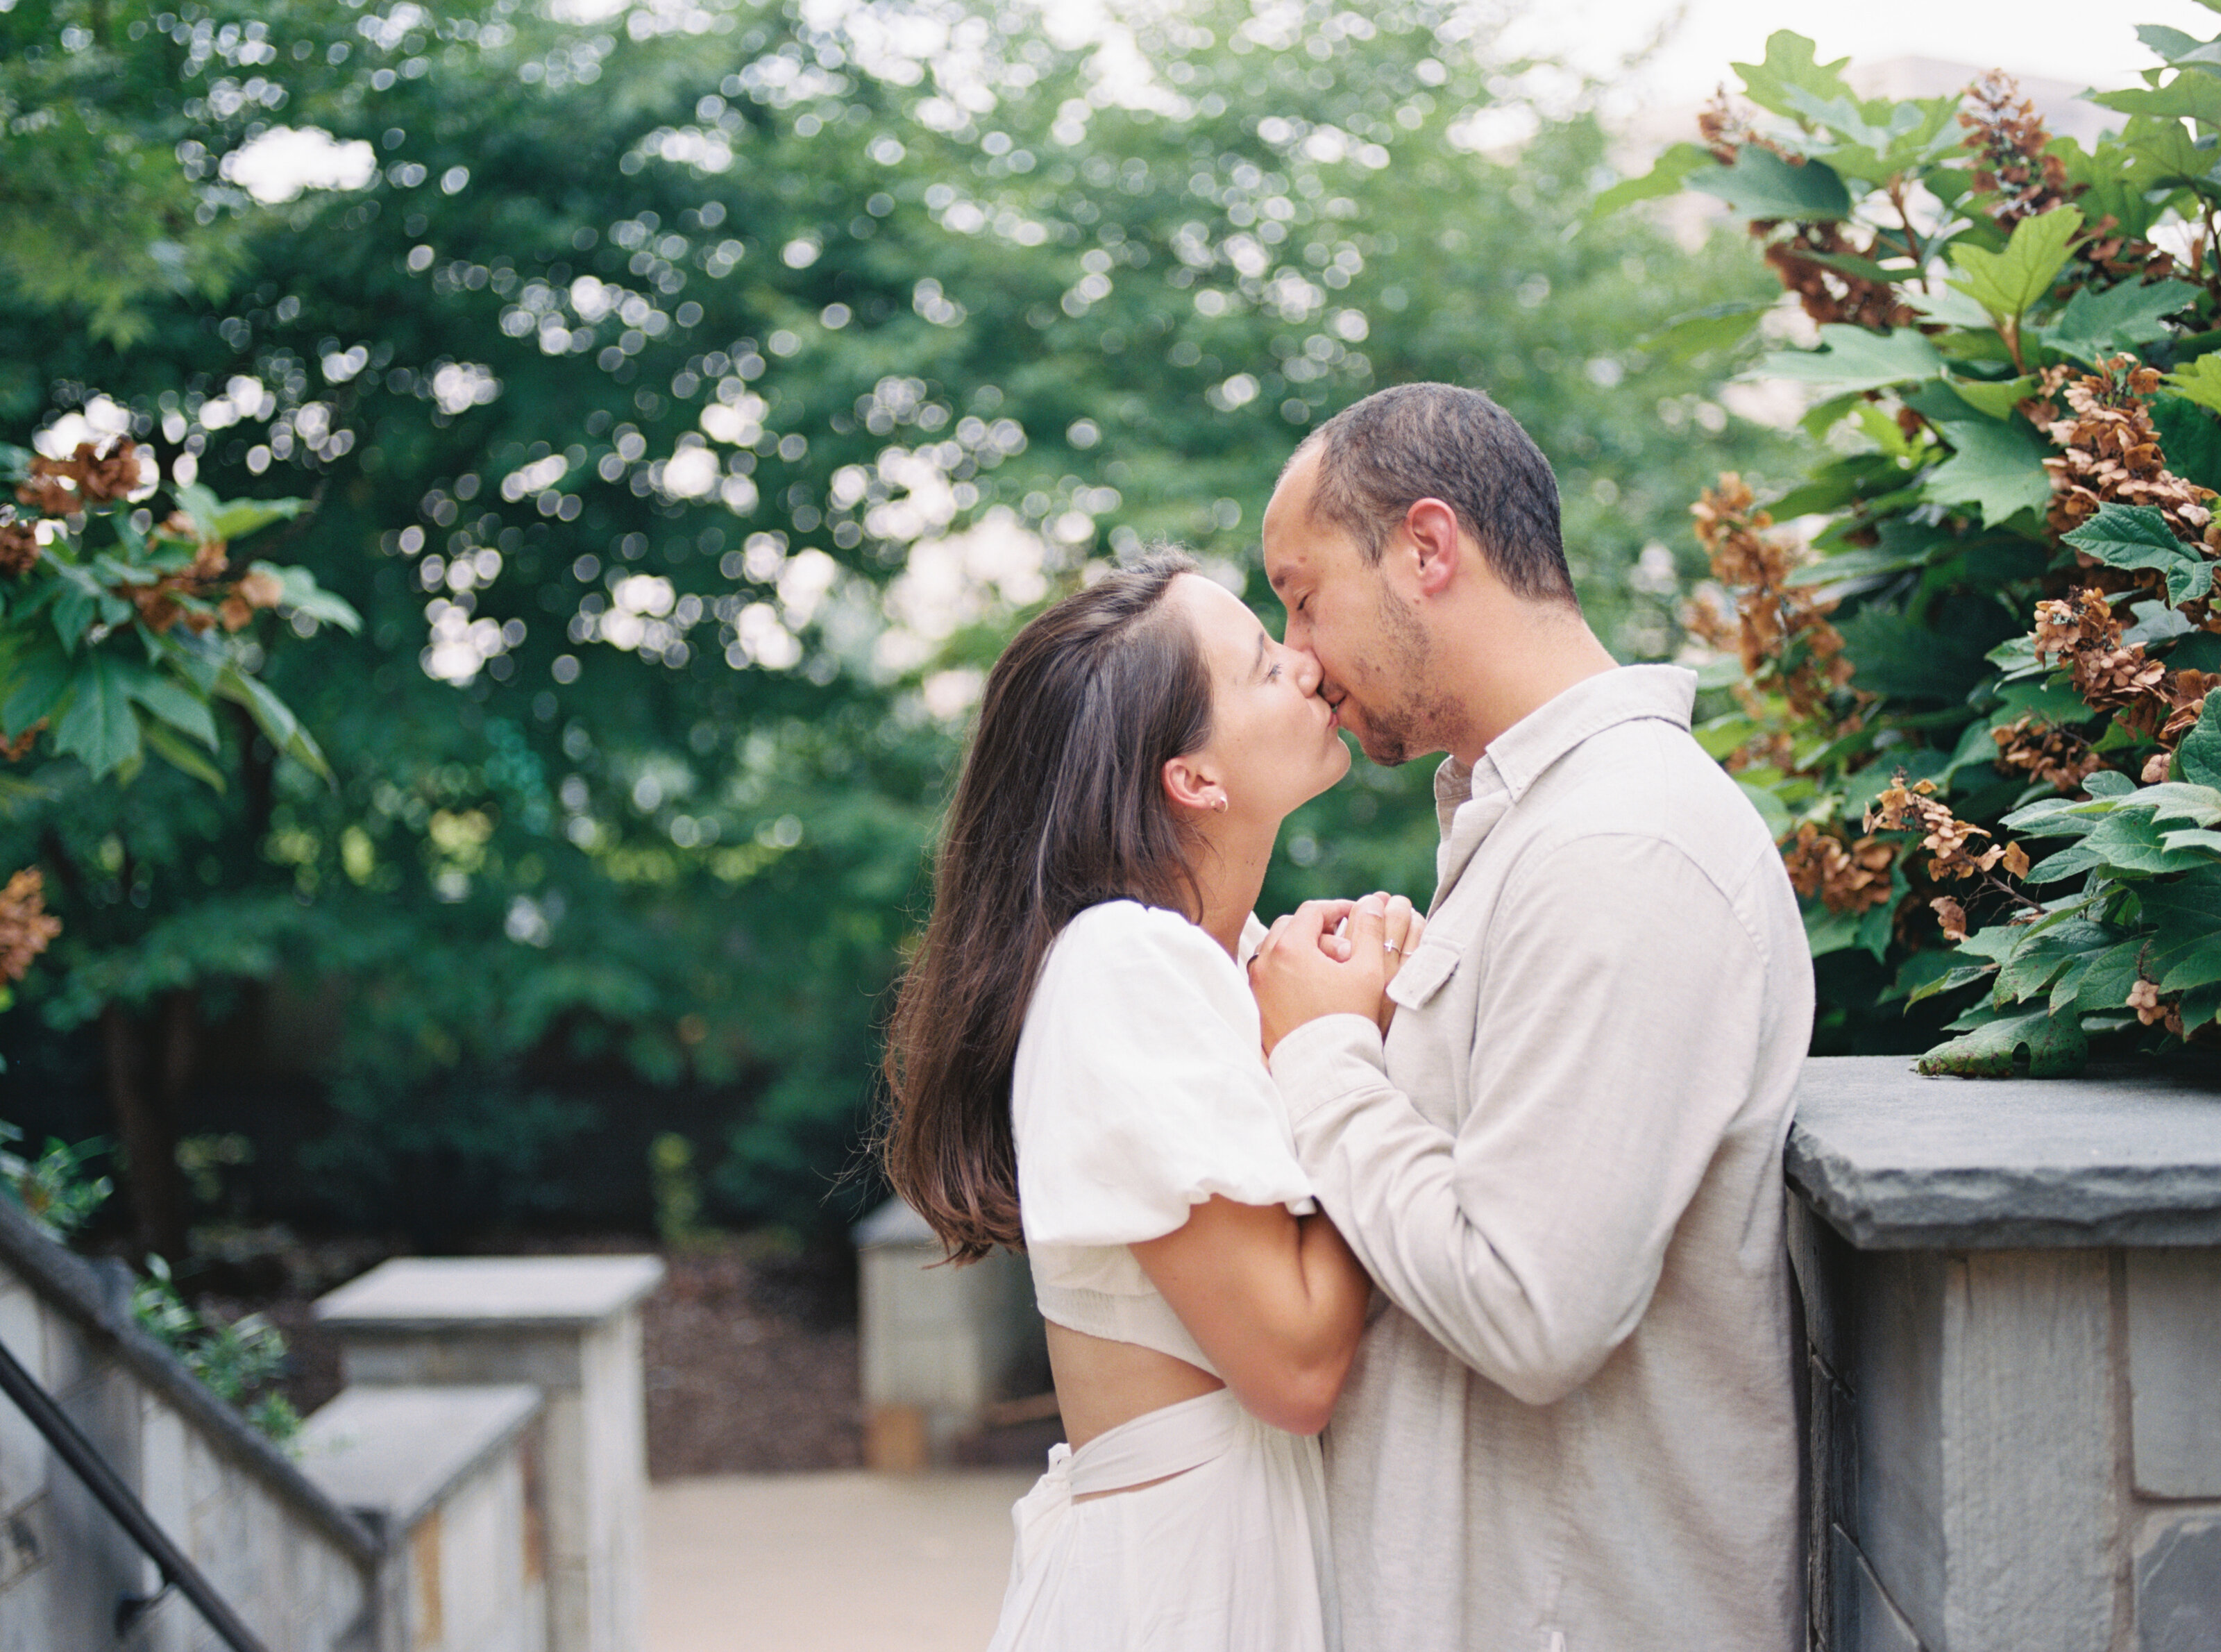 Engagement Photo Poses: Creative Photo Poses Examples